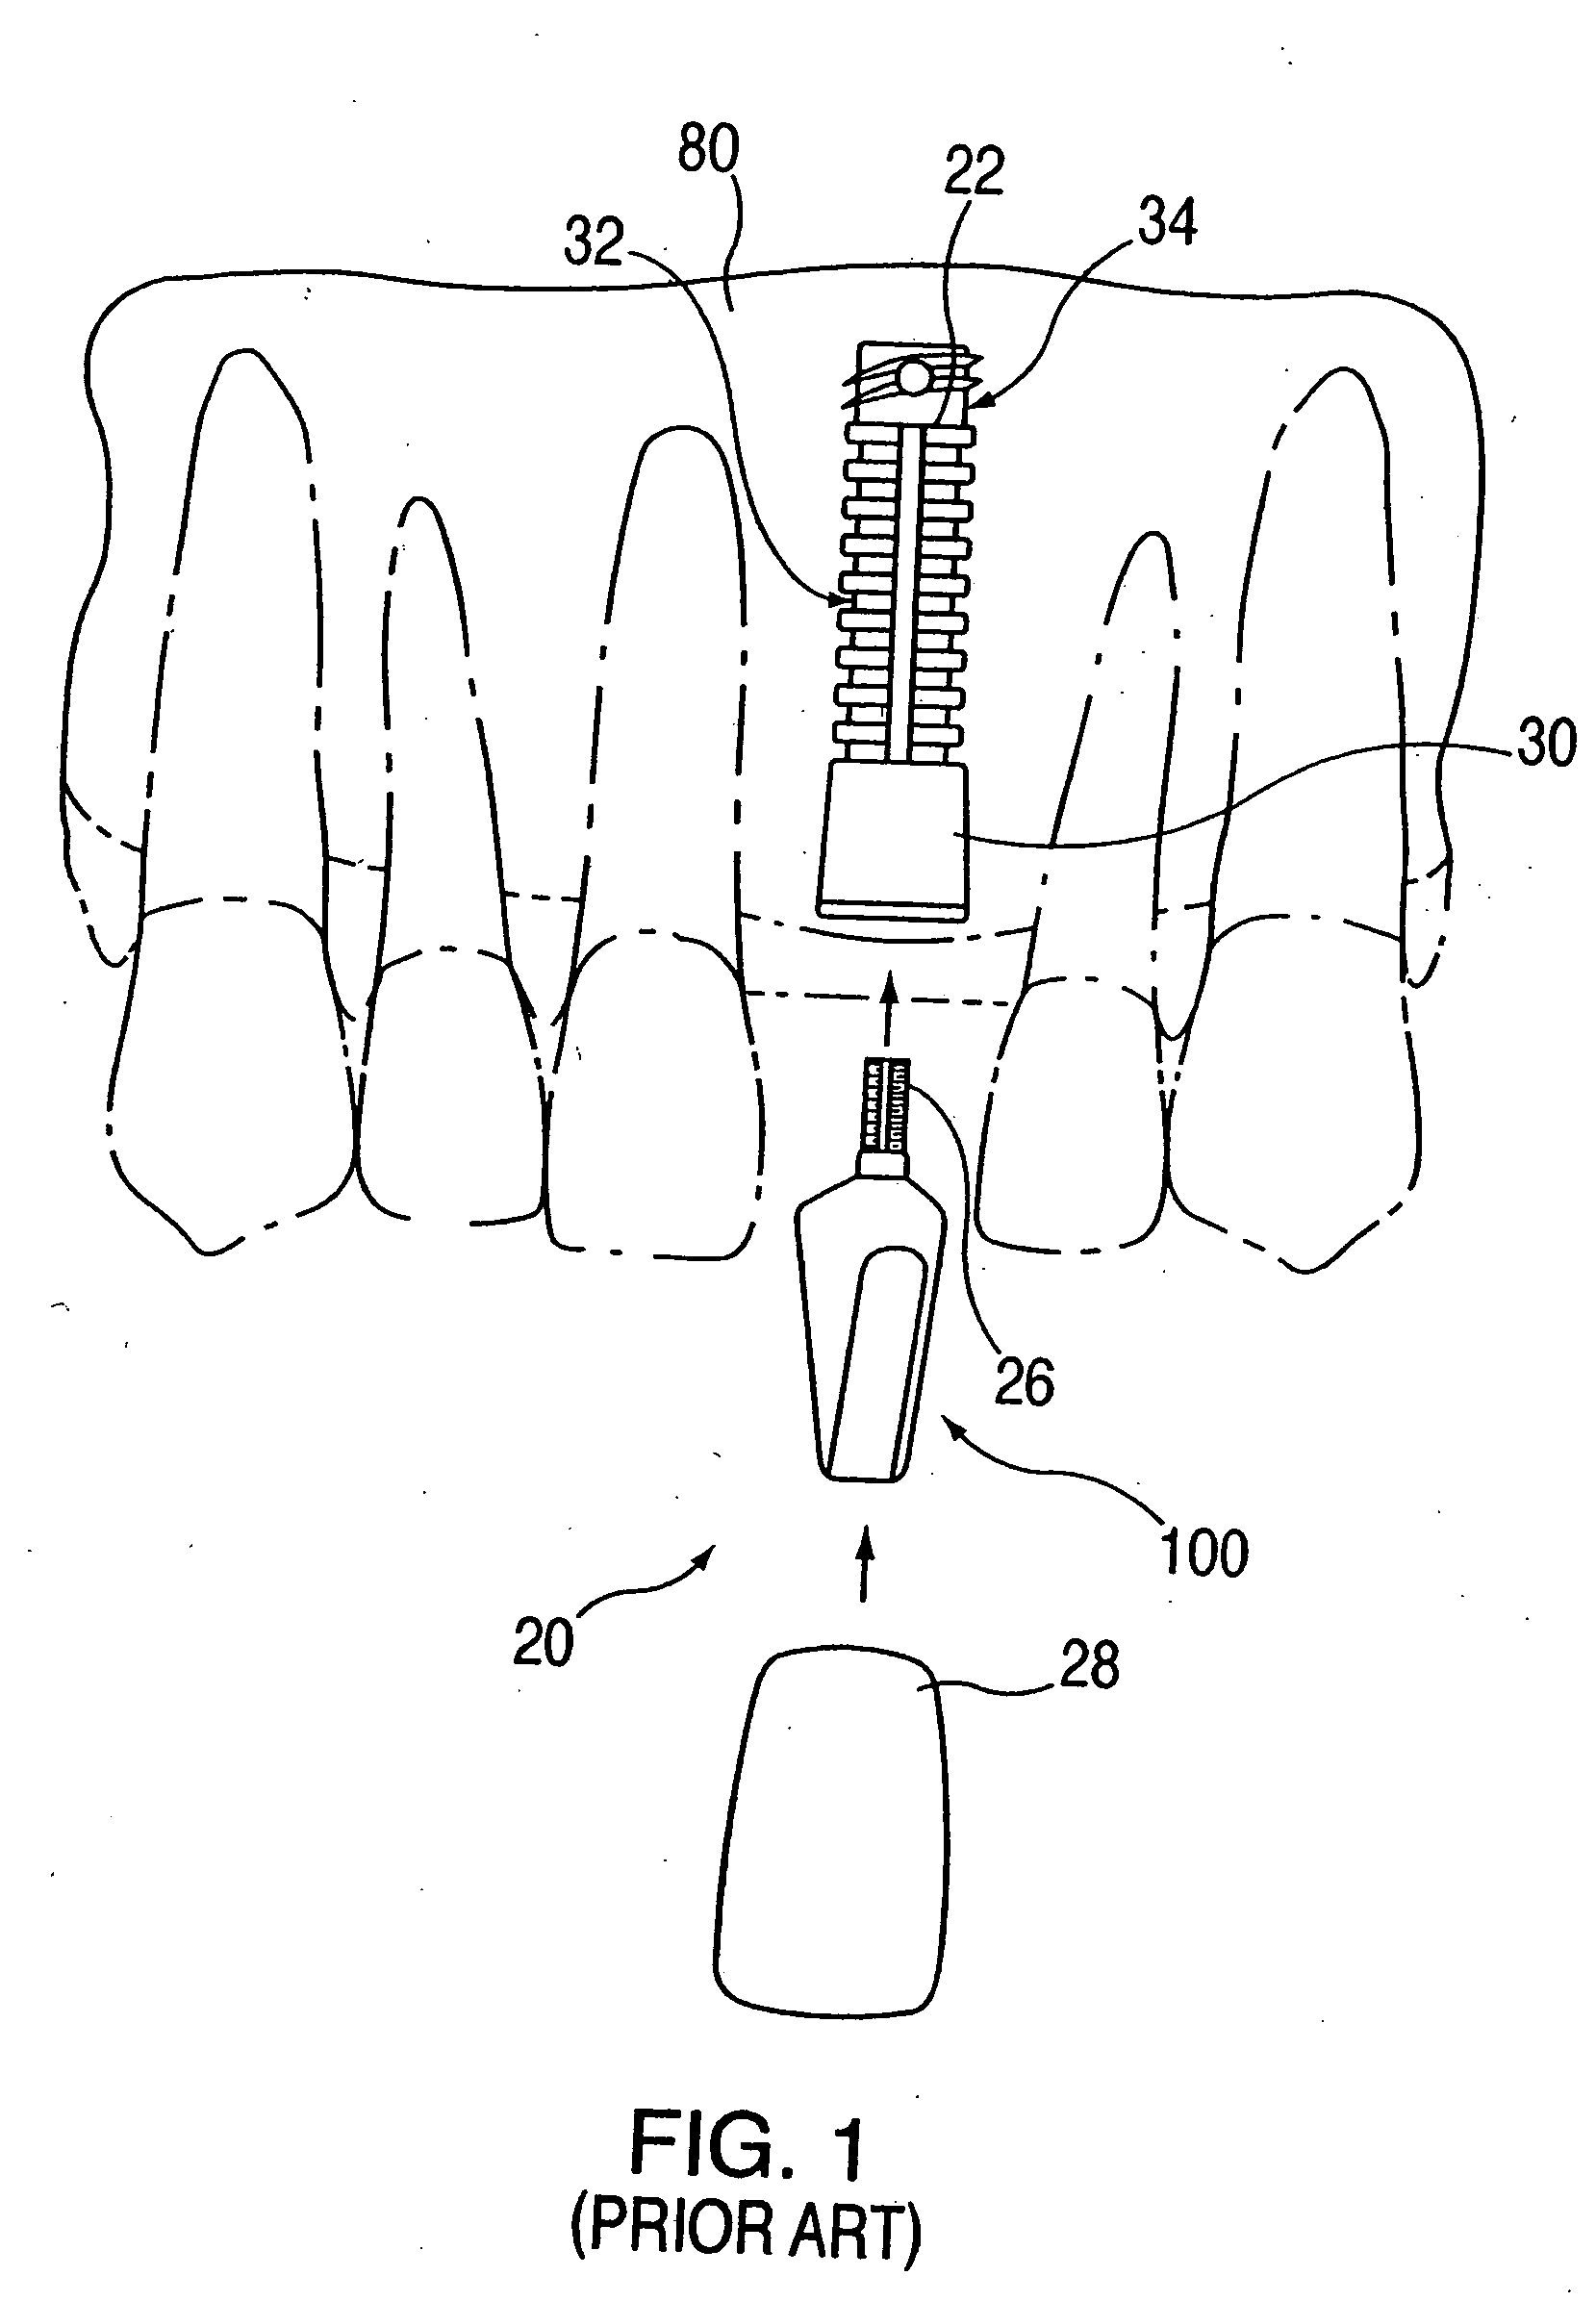 Combination distraction dental implant and method of use